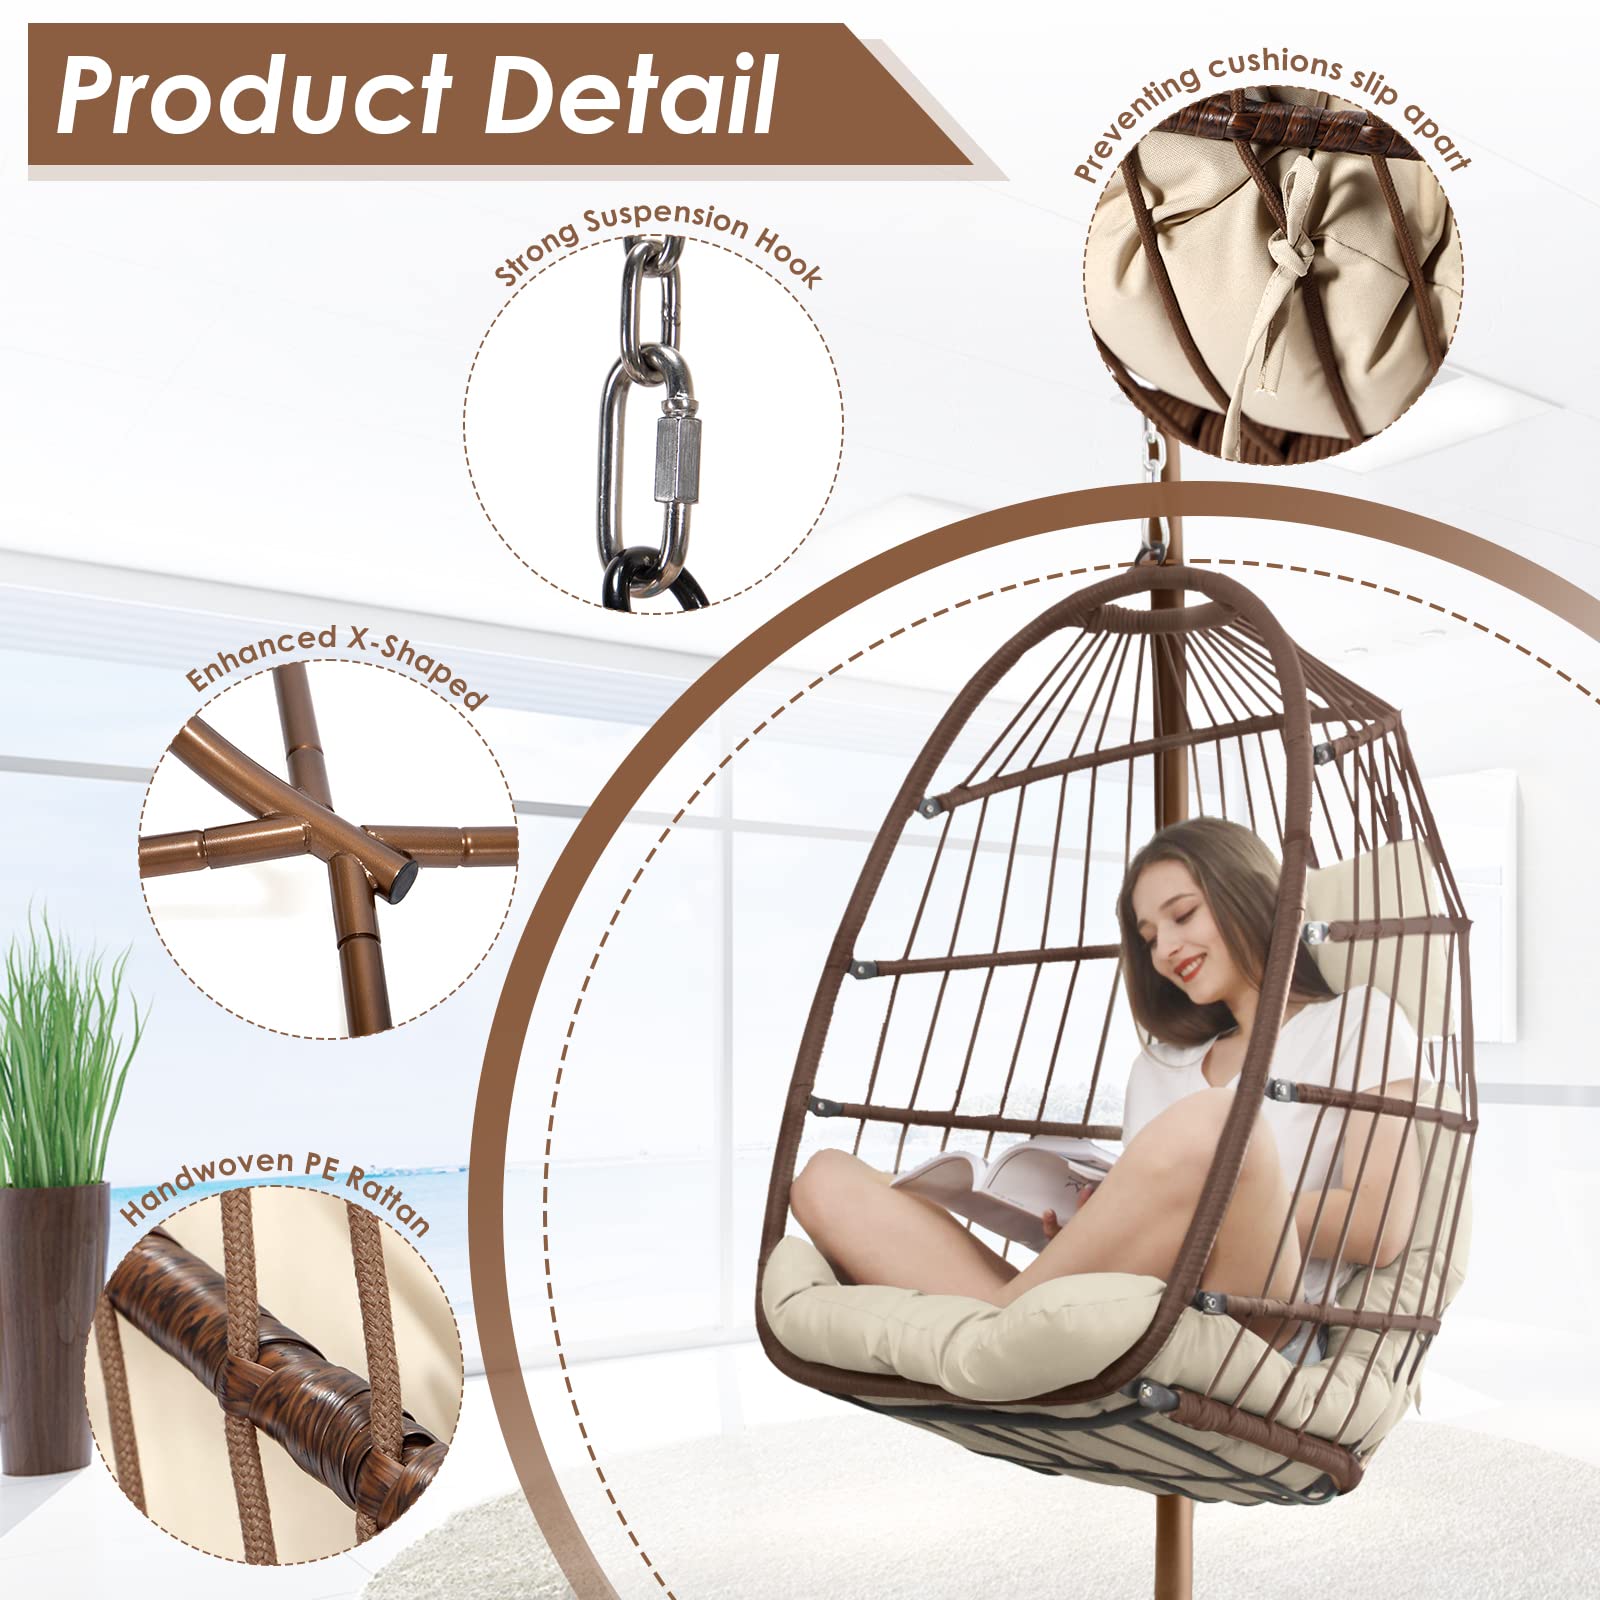 Nicesoul Foldable PE Wicker Brown Hanging Egg Chair With Stand Swing Chair With Cushion and Pillow Capacity 350lbs - image 5 of 8